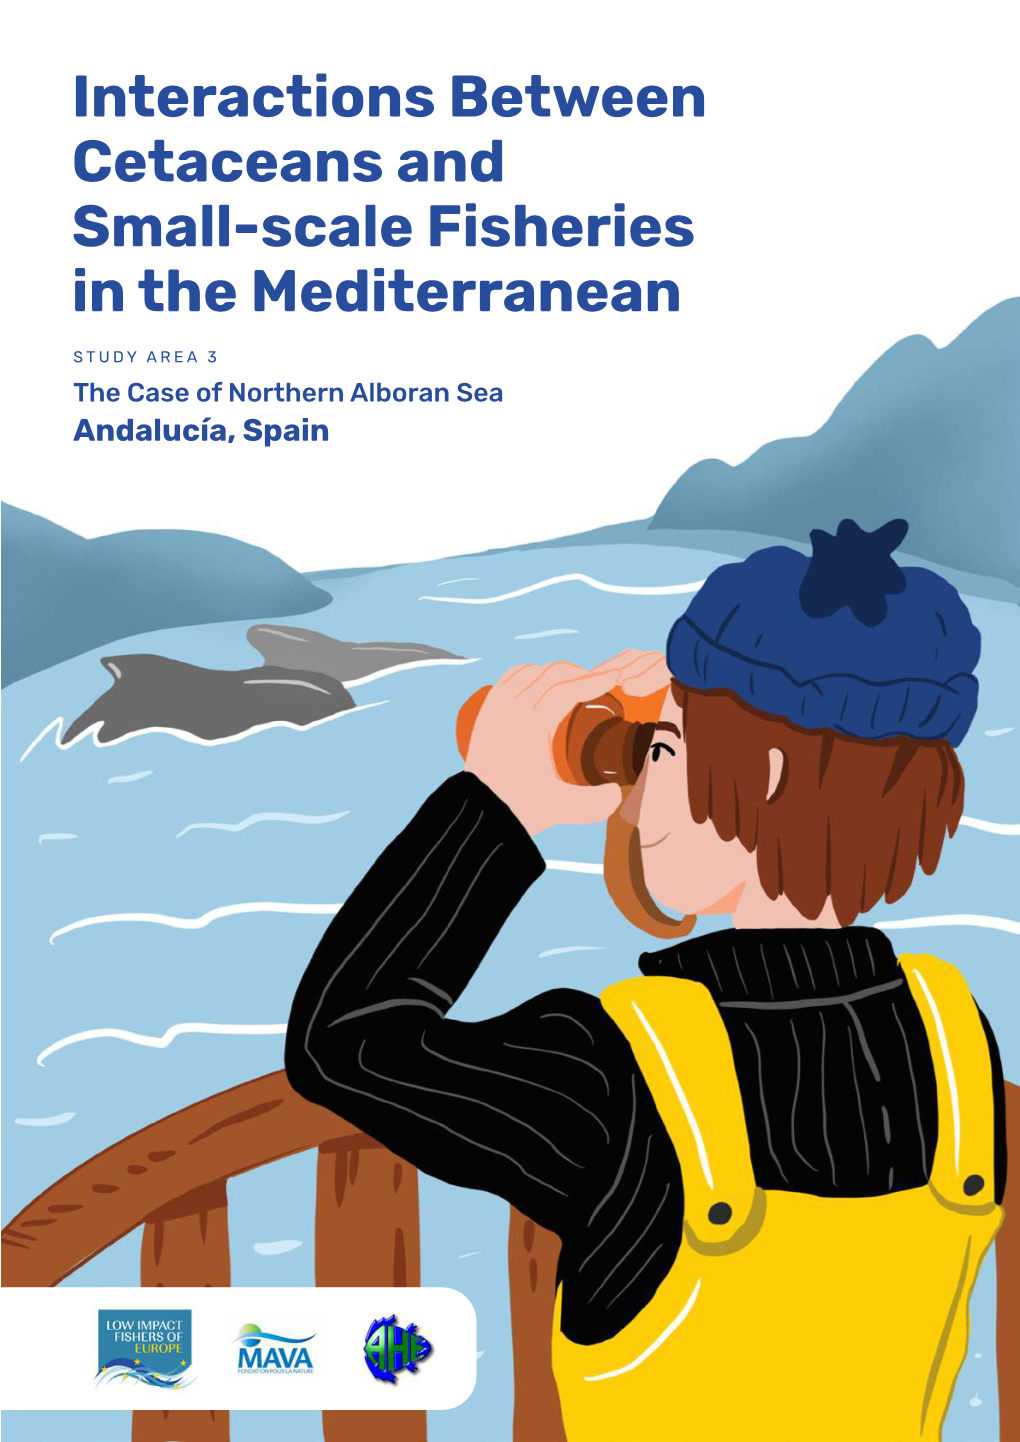 Interaction Between Cetaceans and Small-Scale Fisheries in the Mediterranean